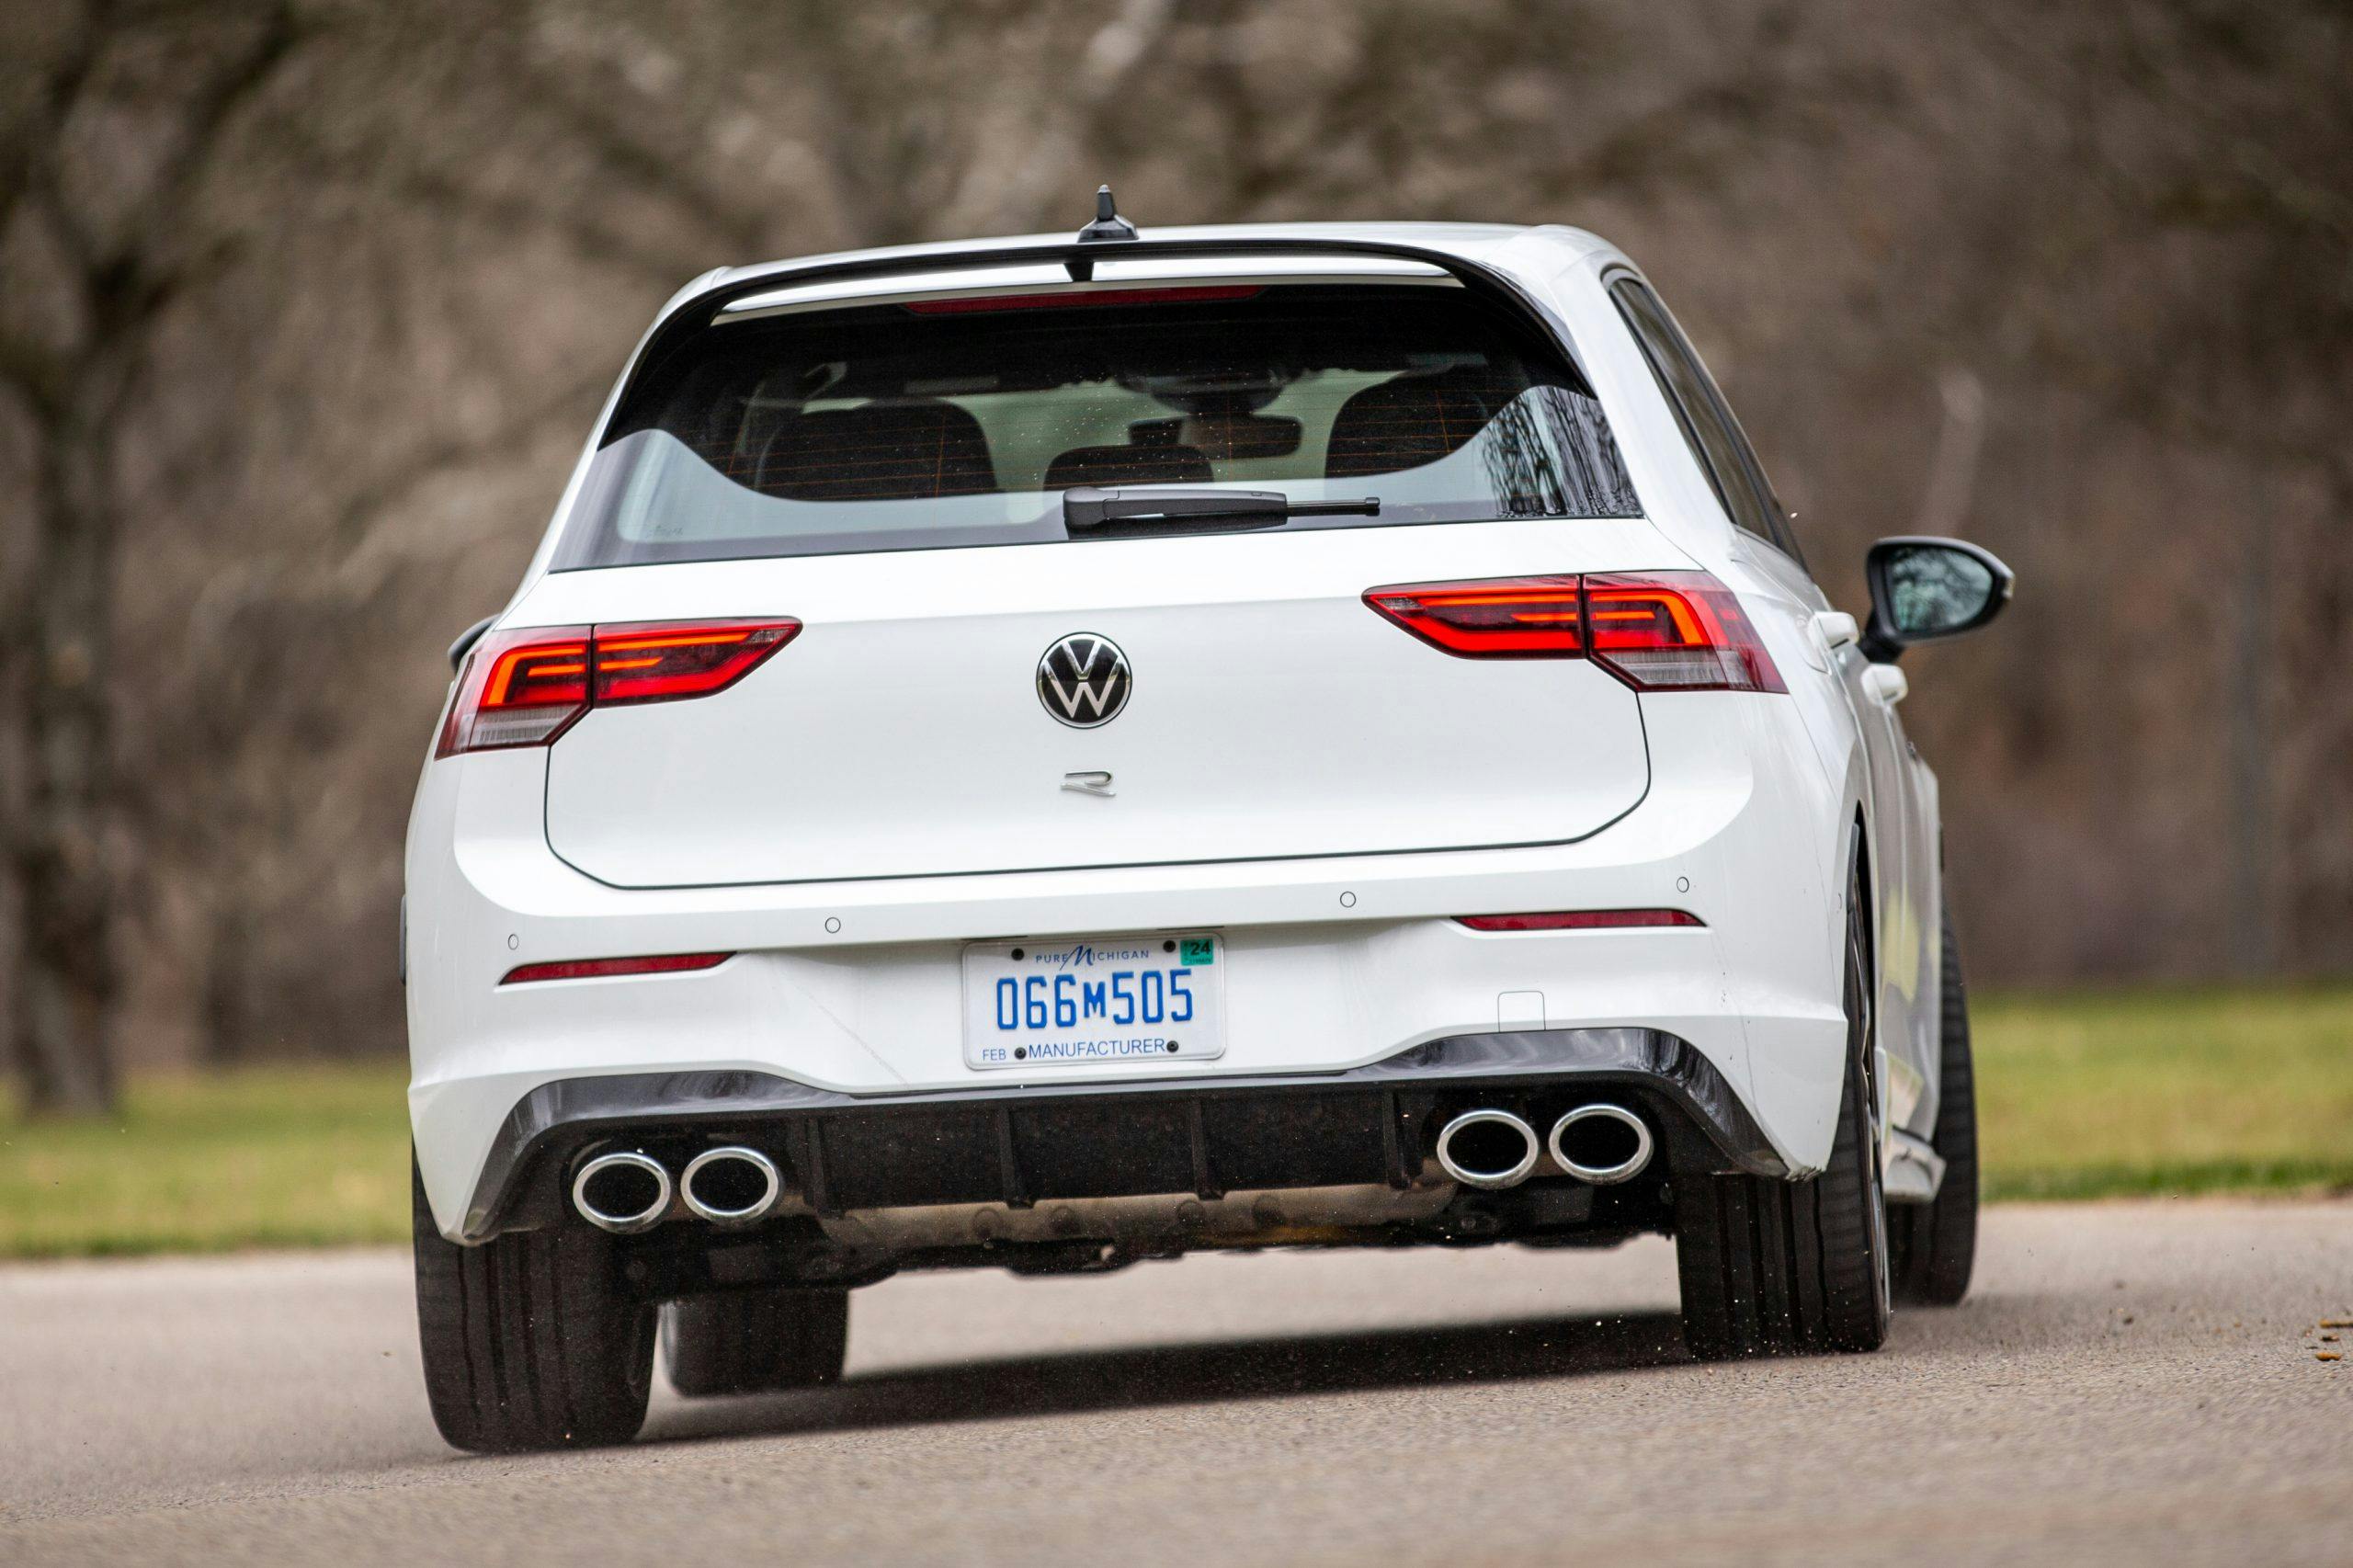 VW Golf R rear driving action